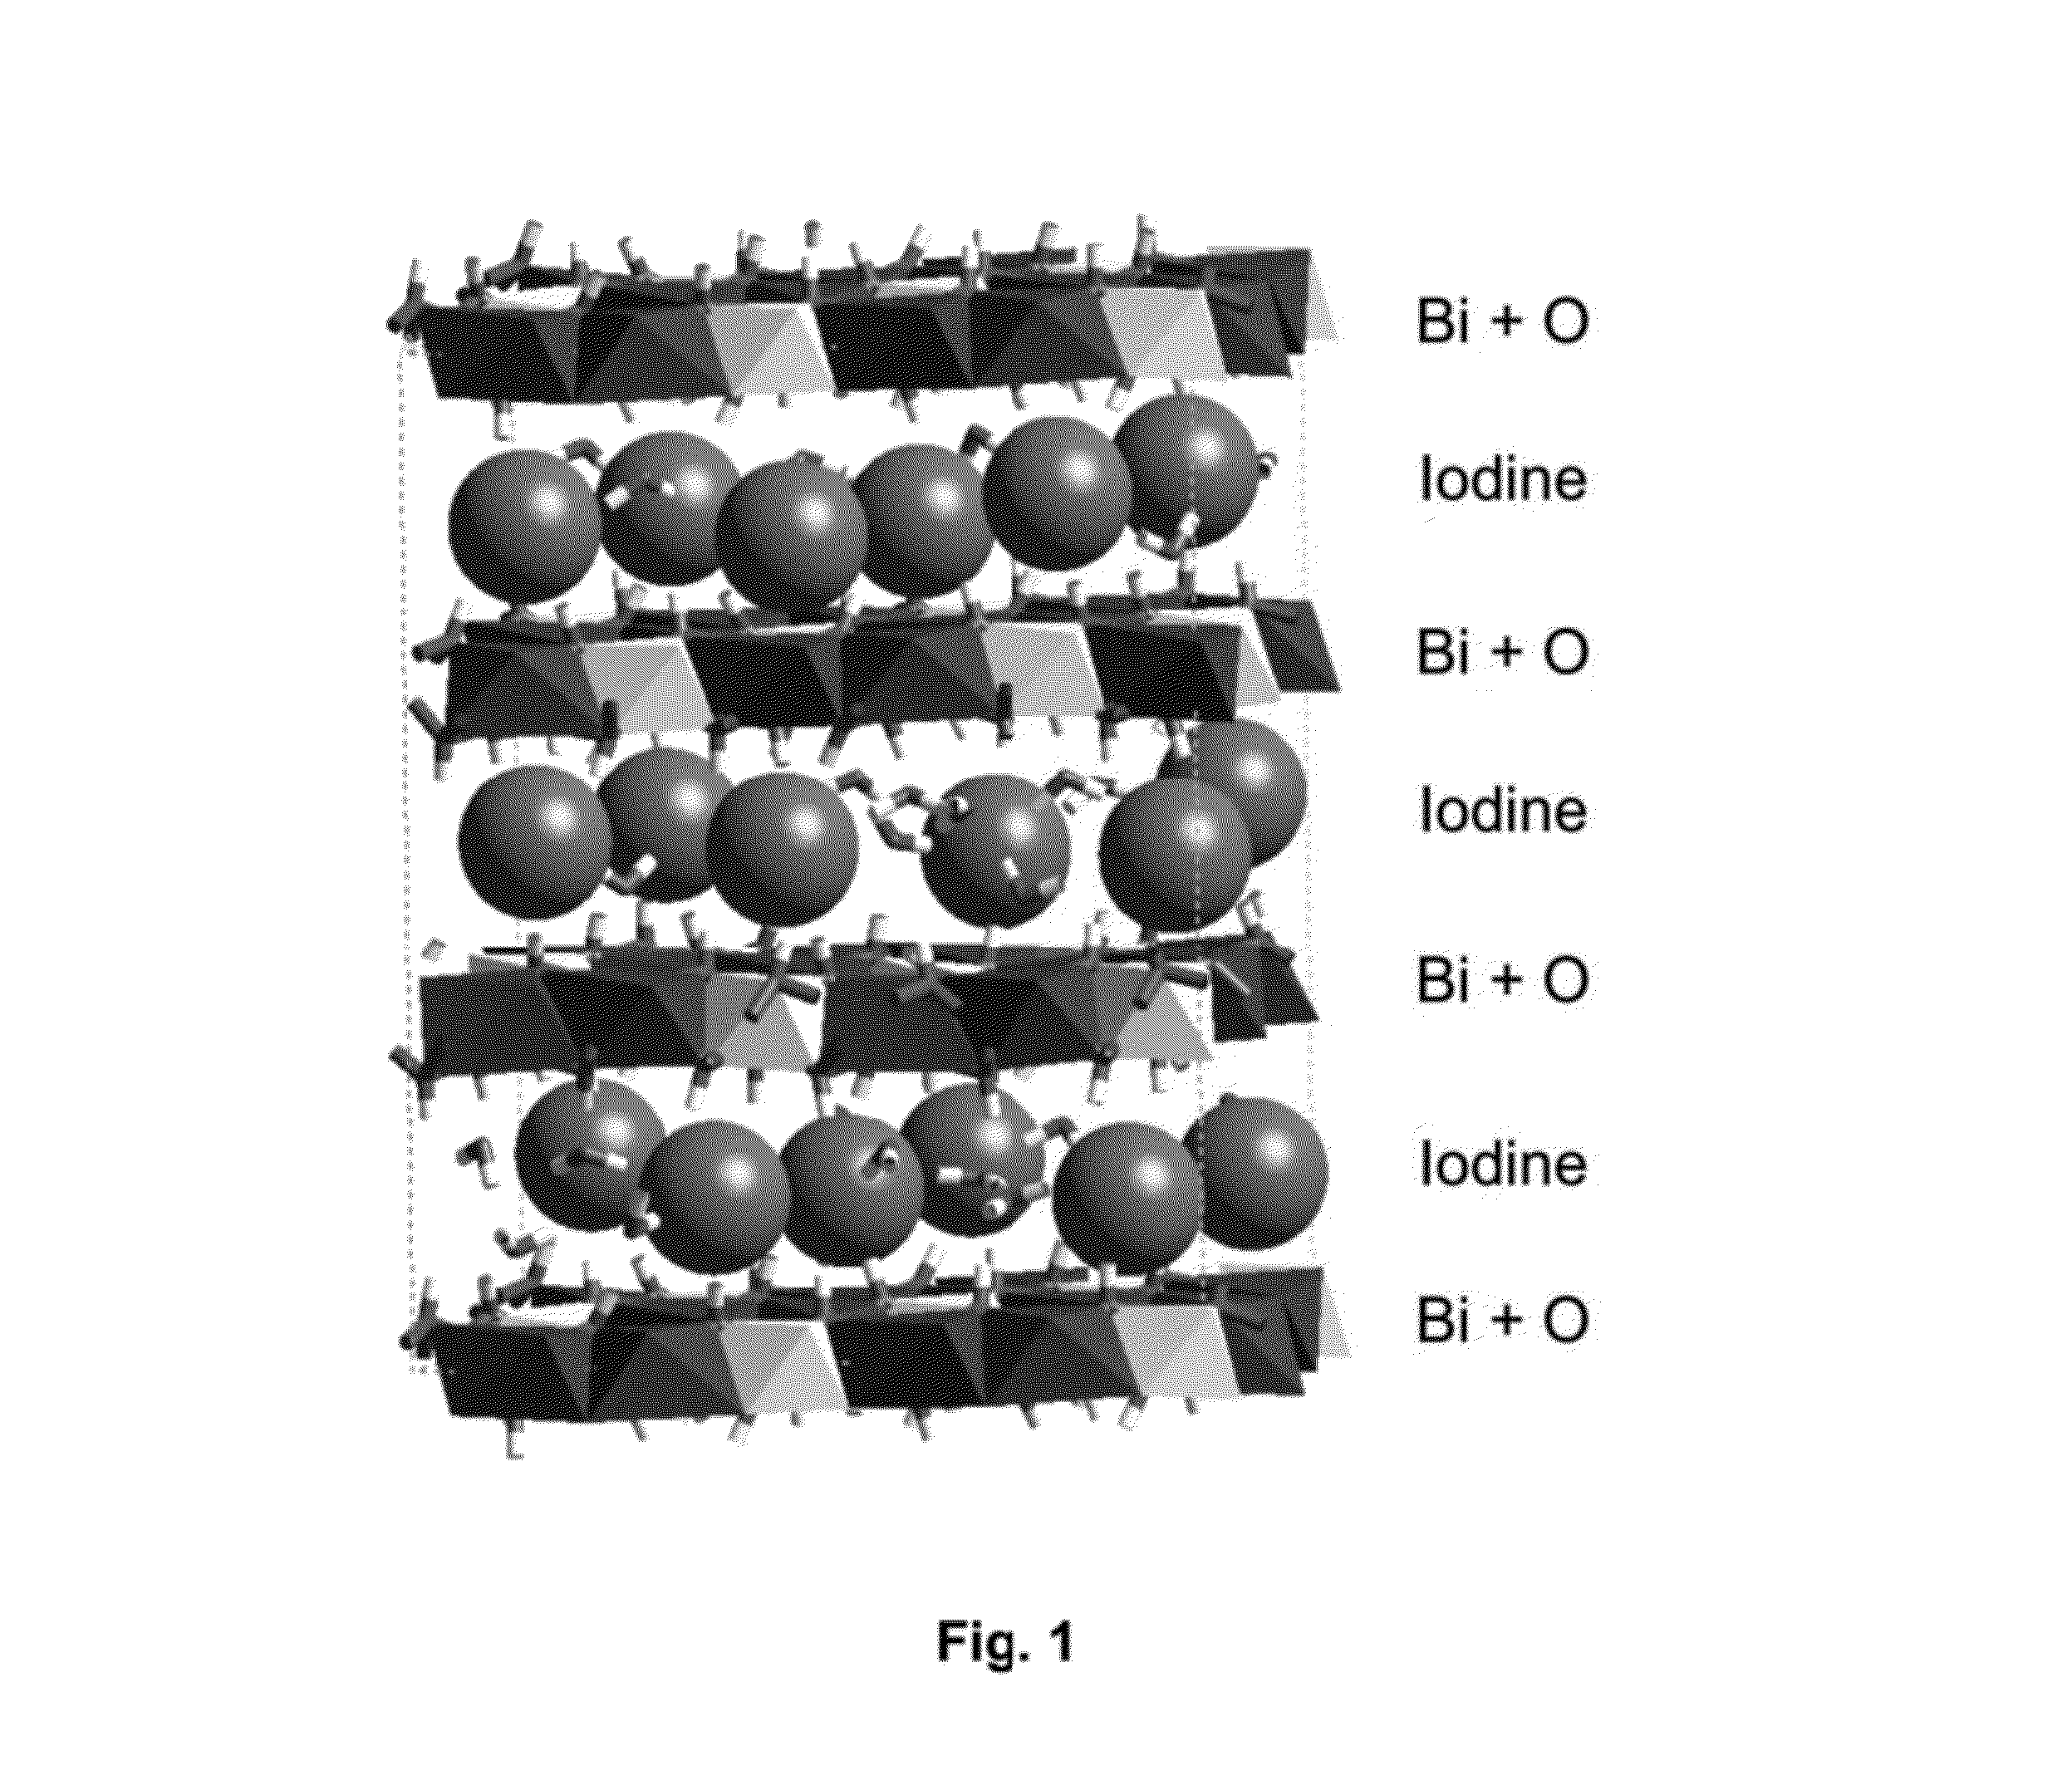 Mixed-layered bismuth-oxygen-iodine materials for capture and waste disposal of radioactive iodine